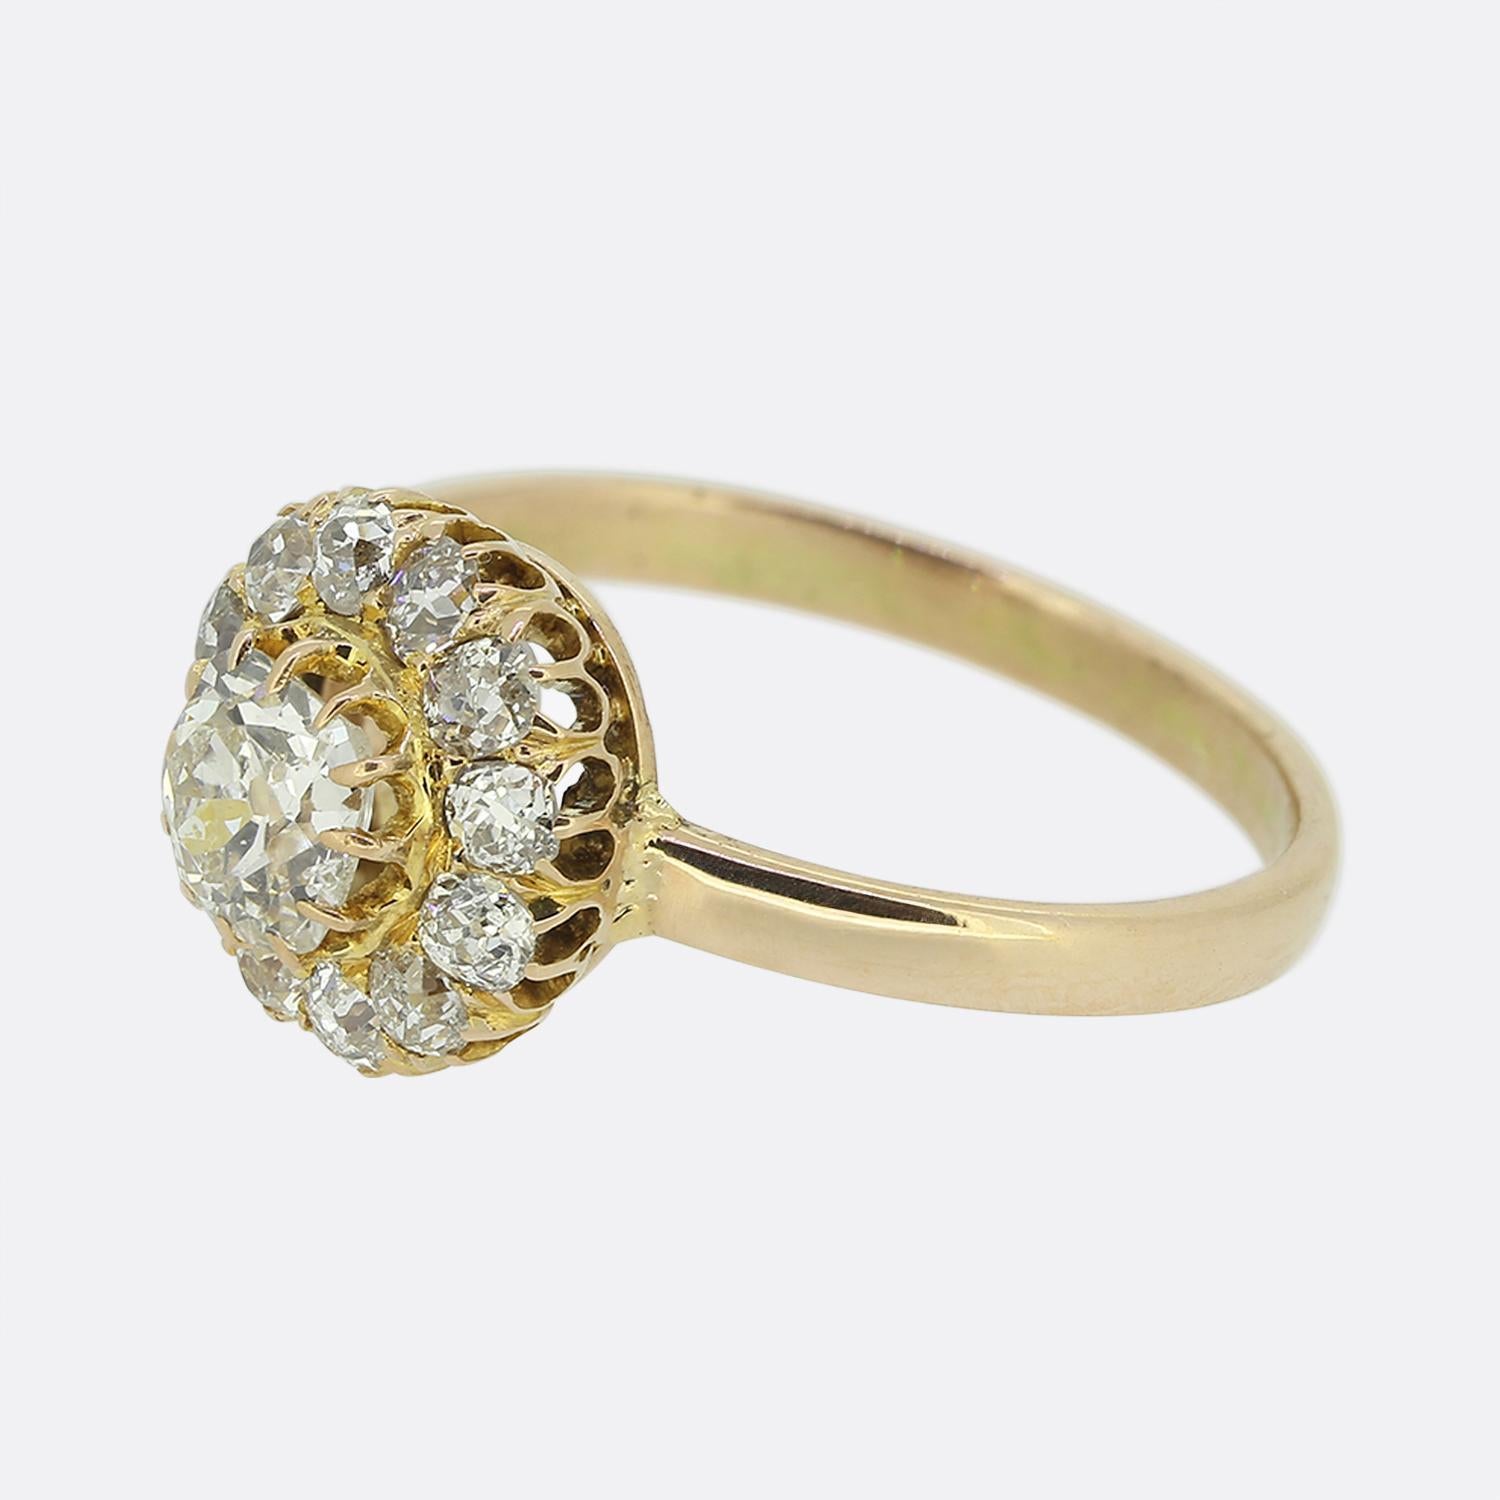 This is a wonderful 15ct rose gold antique diamond cluster ring. The ring features a central 0.45 carat old cut diamond that is surrounded by a further 12 smaller old cut diamonds. Each of the diamonds are claw set and they are well matched for